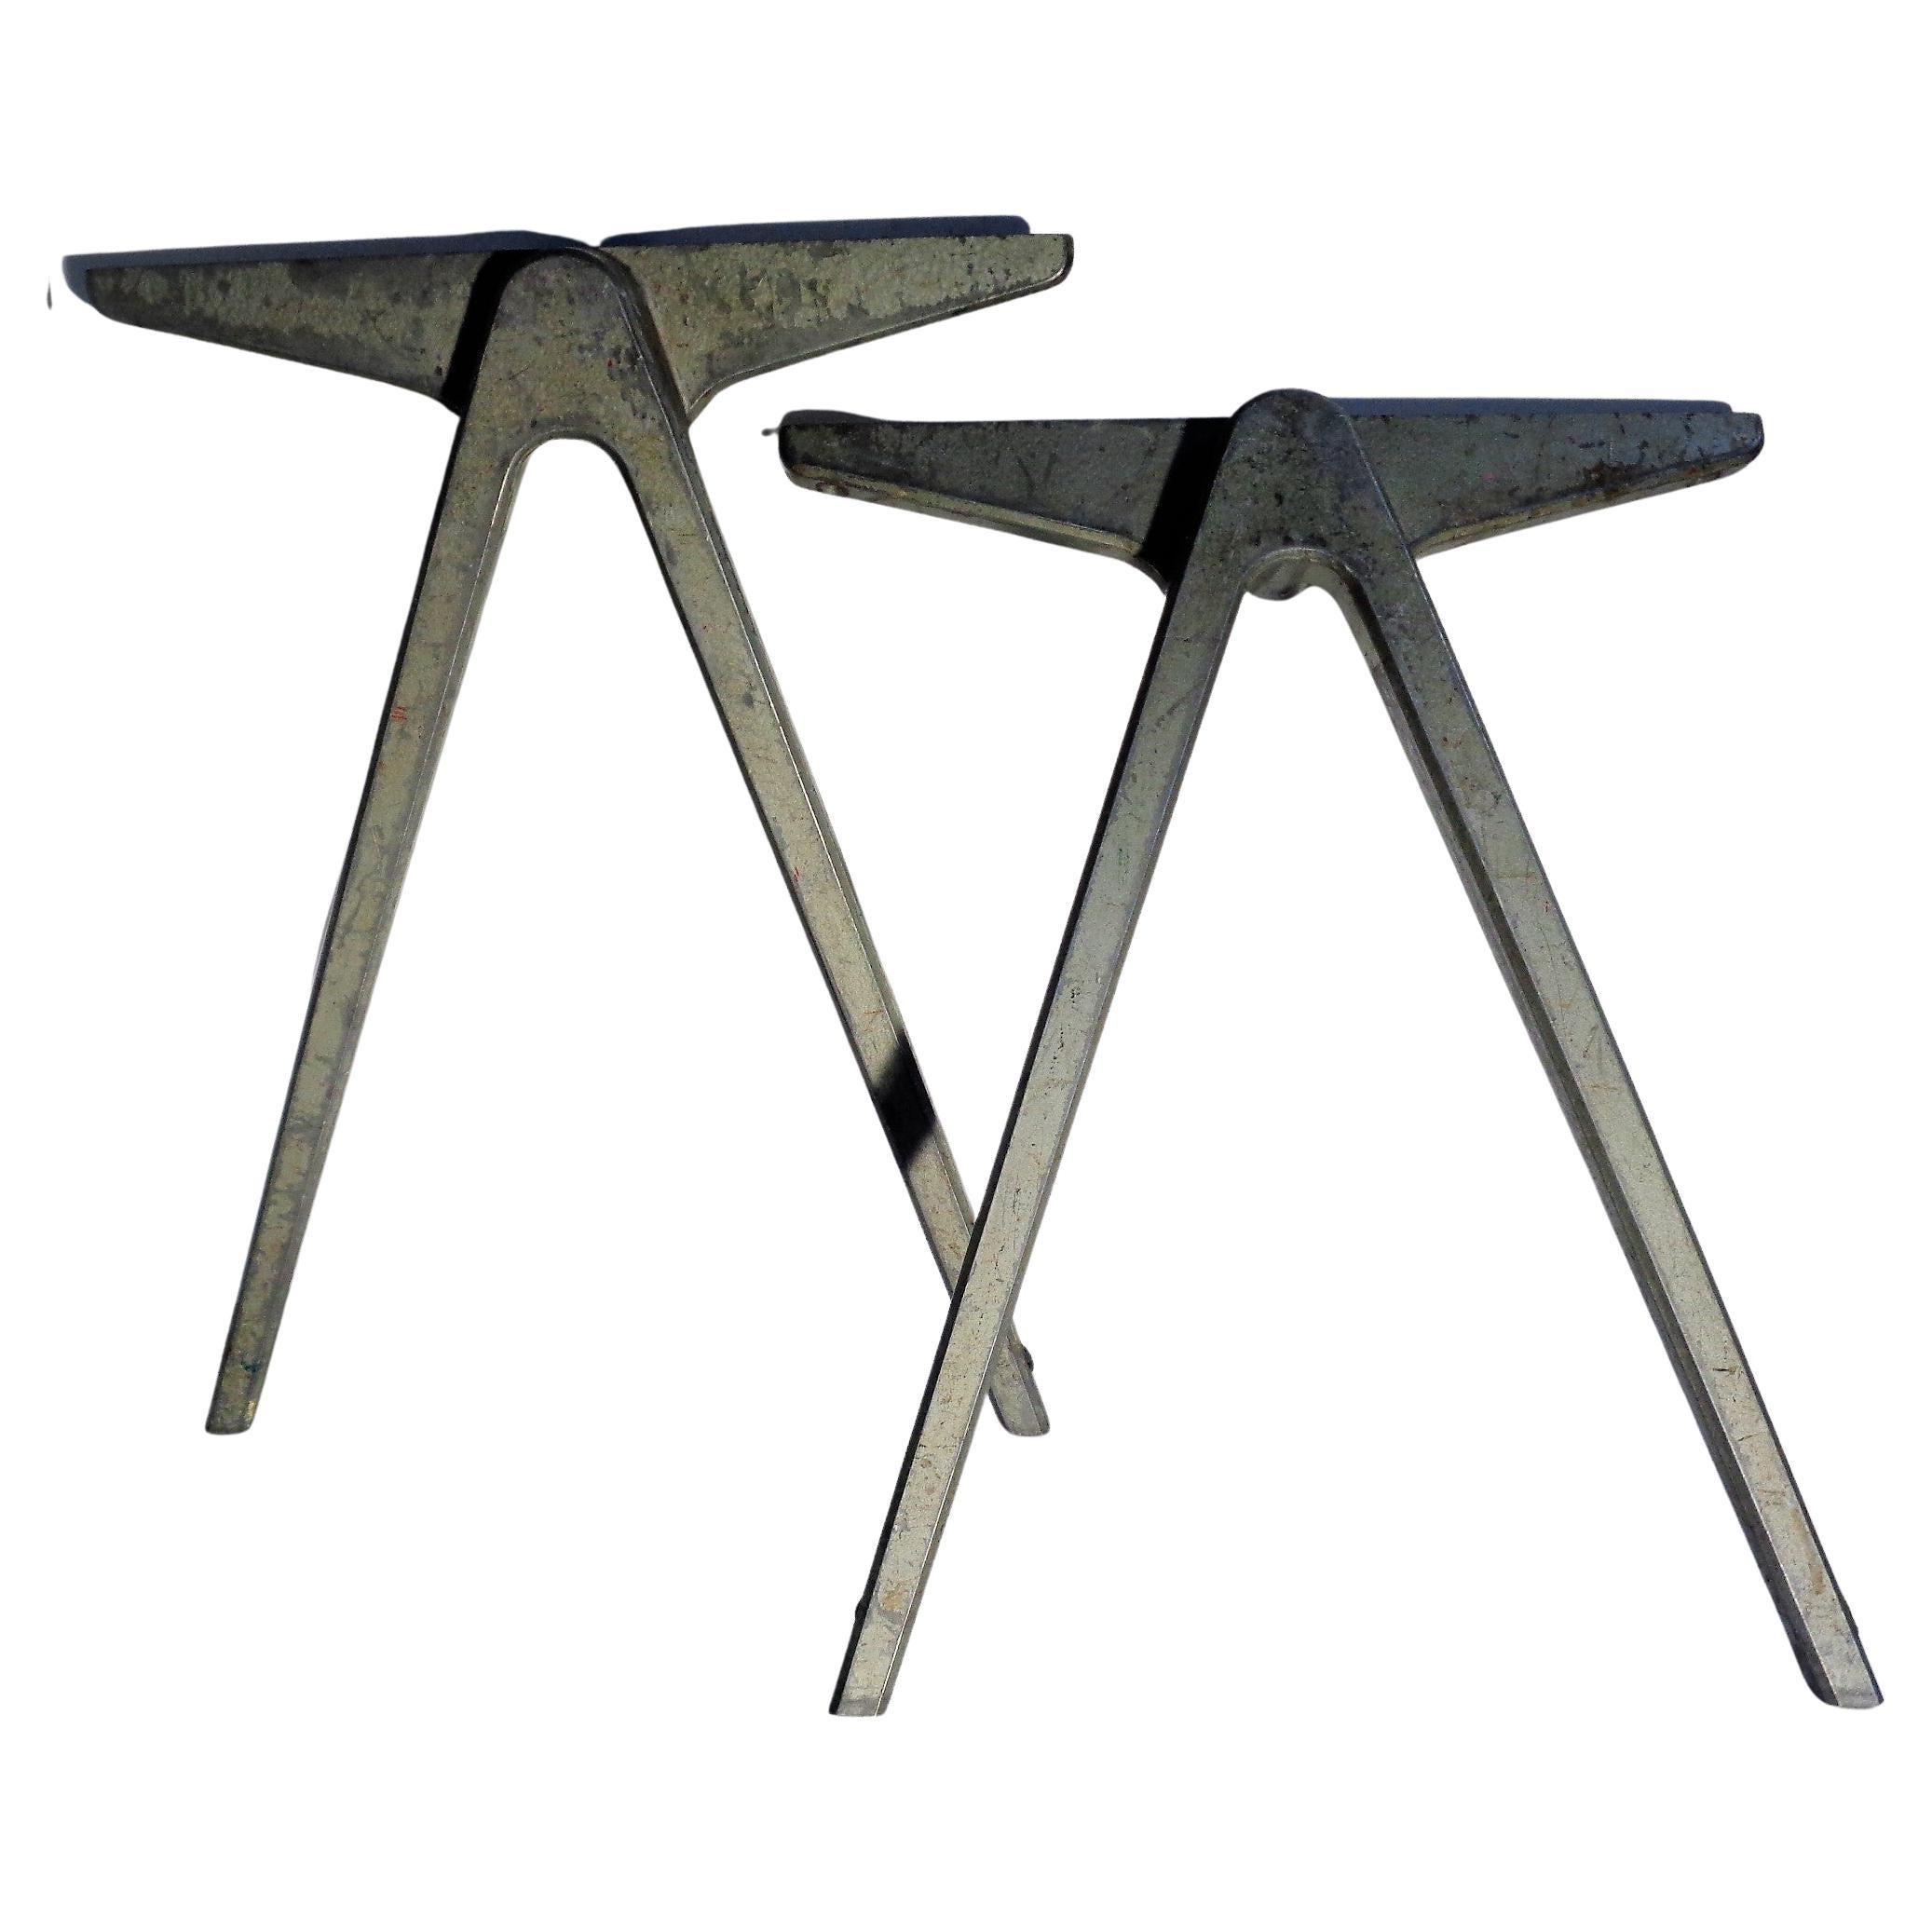 Pair of early industrial modernist aluminum compass form table legs / table end bases in the style of Jean Prouve' by James Leonard for Esavian, England 1940. This earlier compass design by James Leonard for Esavian preceded the Prouve' compass